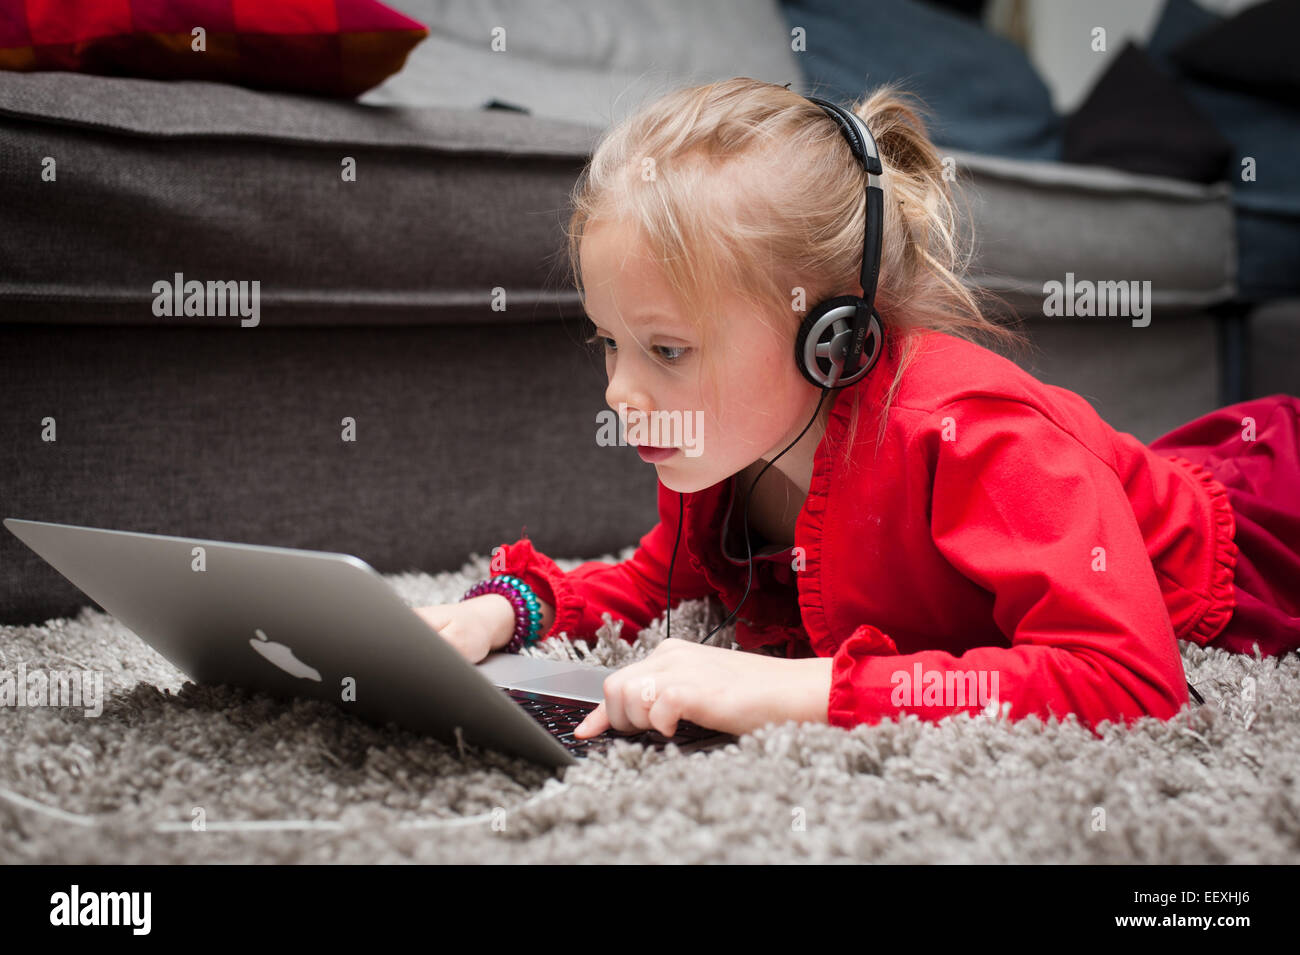 Child with headphones and laptop Stock Photo